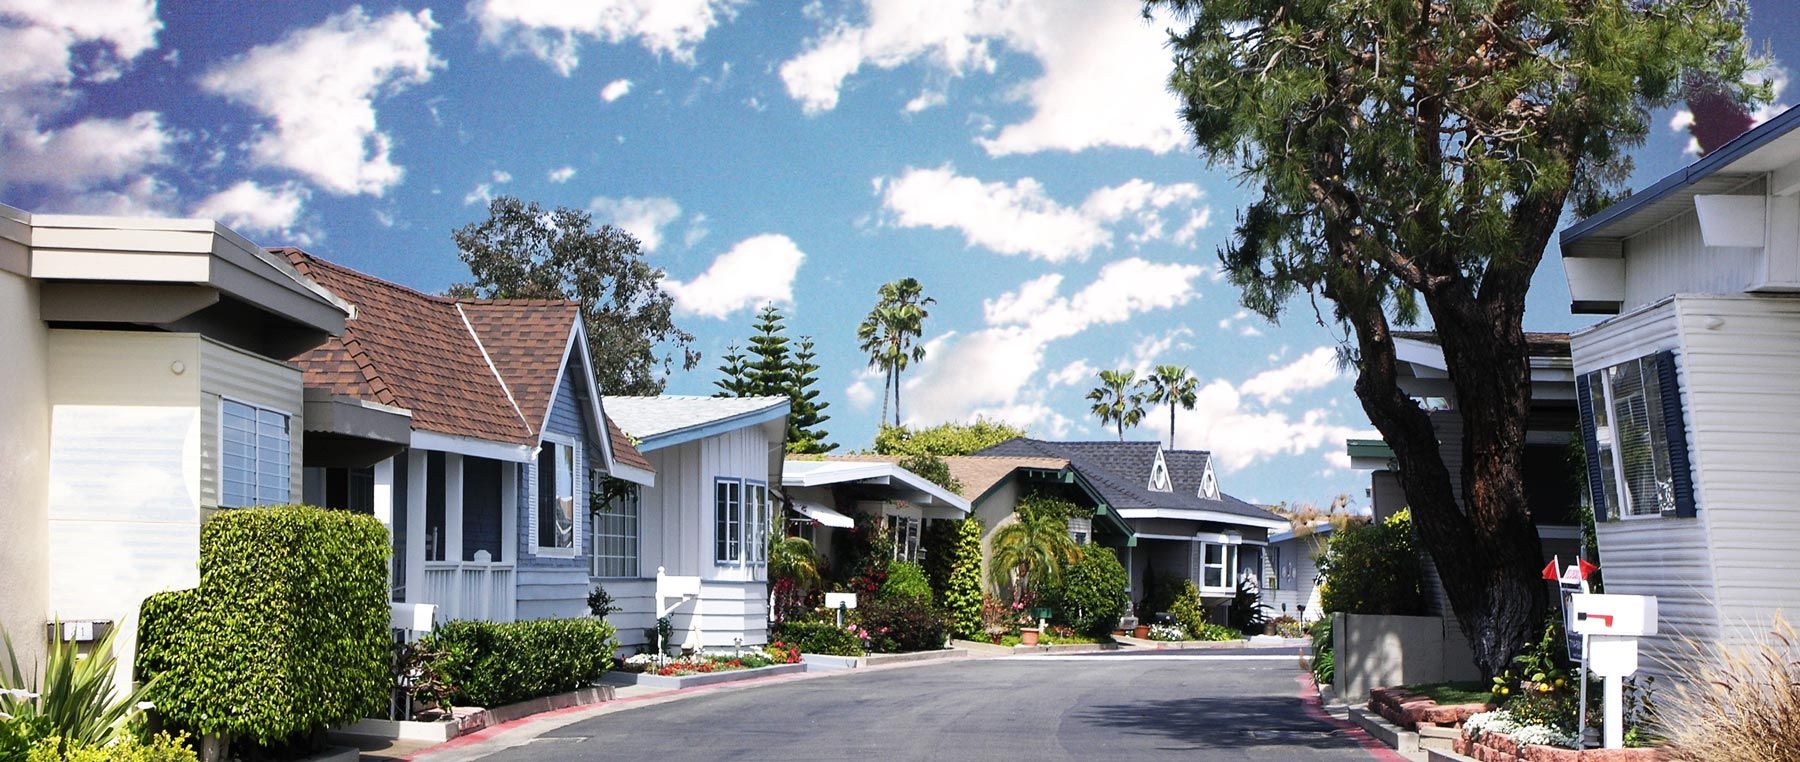 Row of Modular Homes on Street in Bayside Village Mobile Home Park